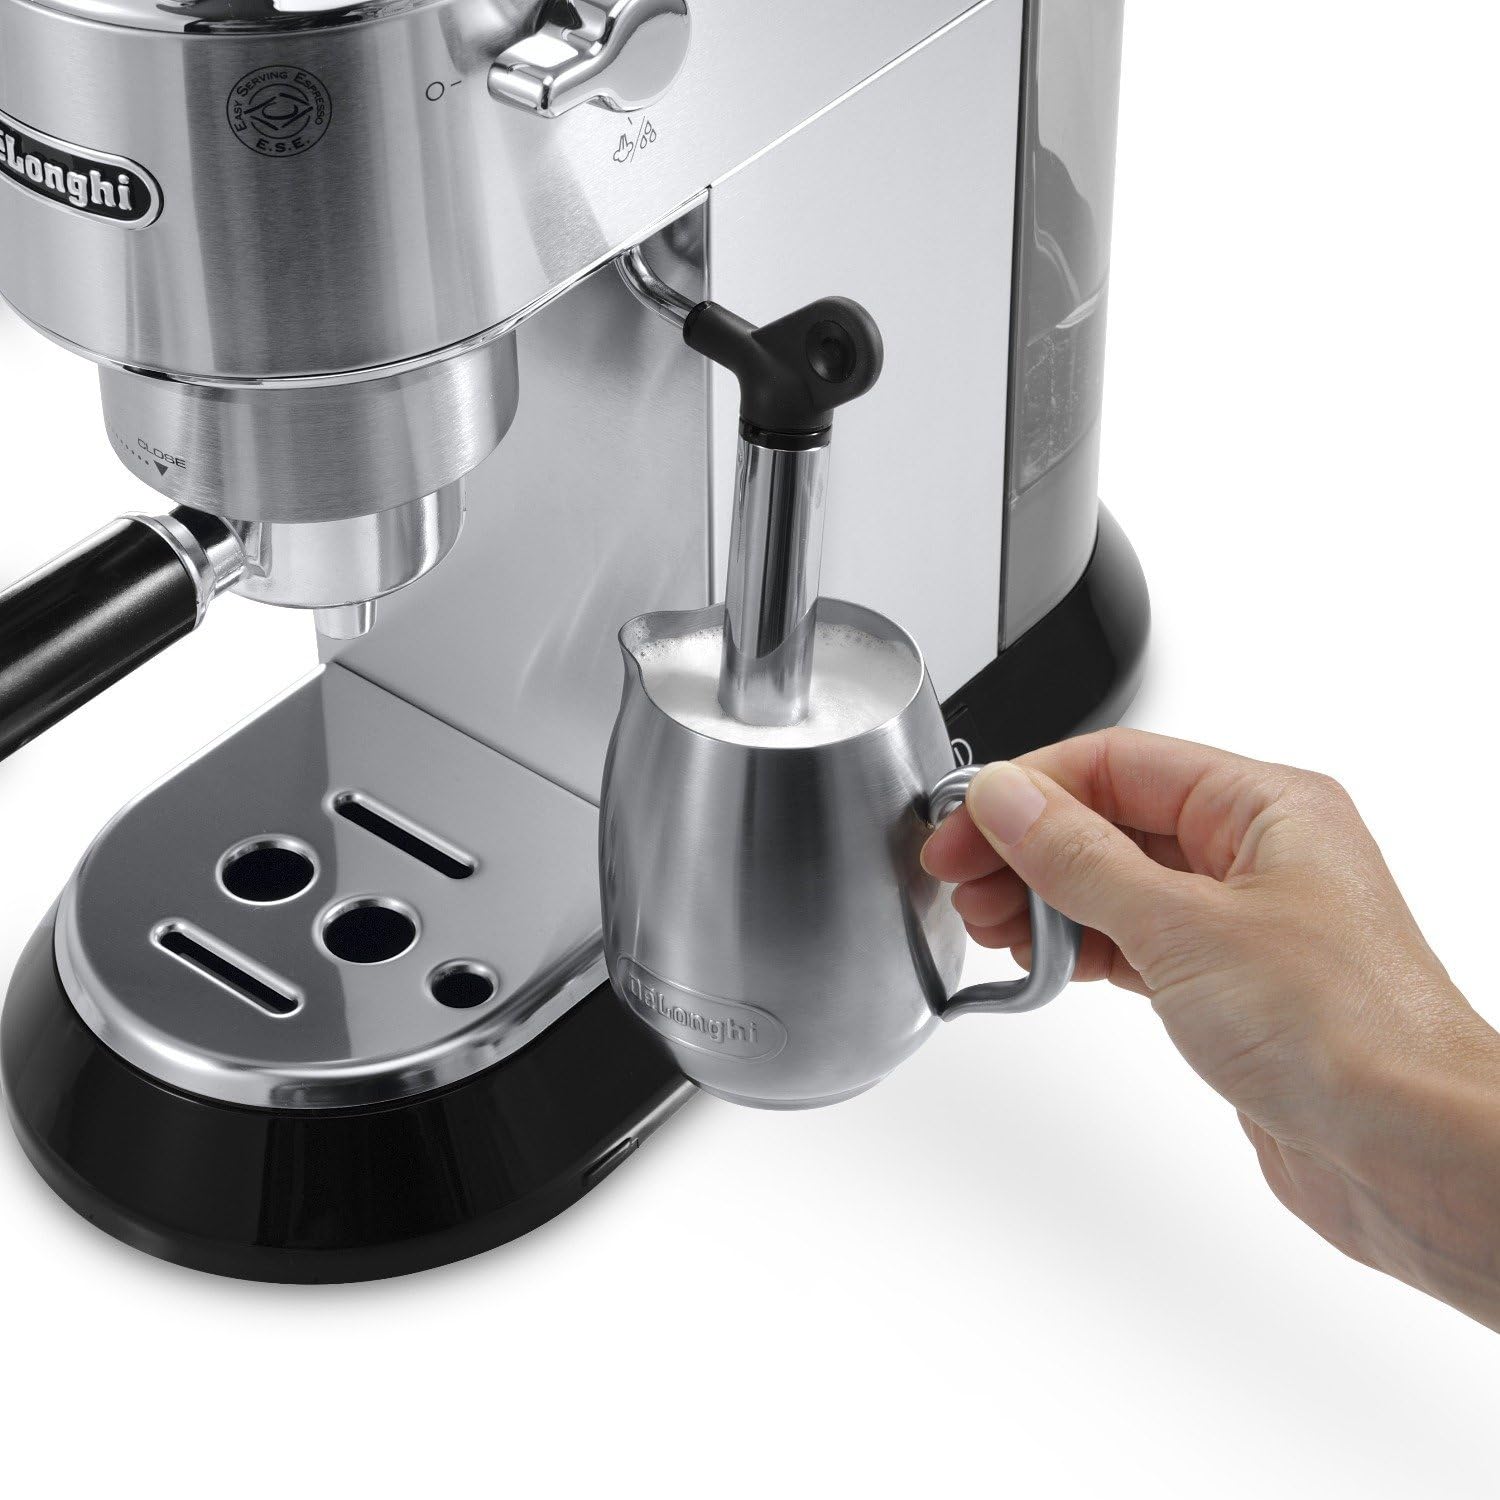 DeLonghi Dedica EC680M, Espresso Machine, Coffee and Cappucino Maker with Milk Frother, Metal / Stainless, Compact Design 6 in Wide, Fit Mug Up to 5 in